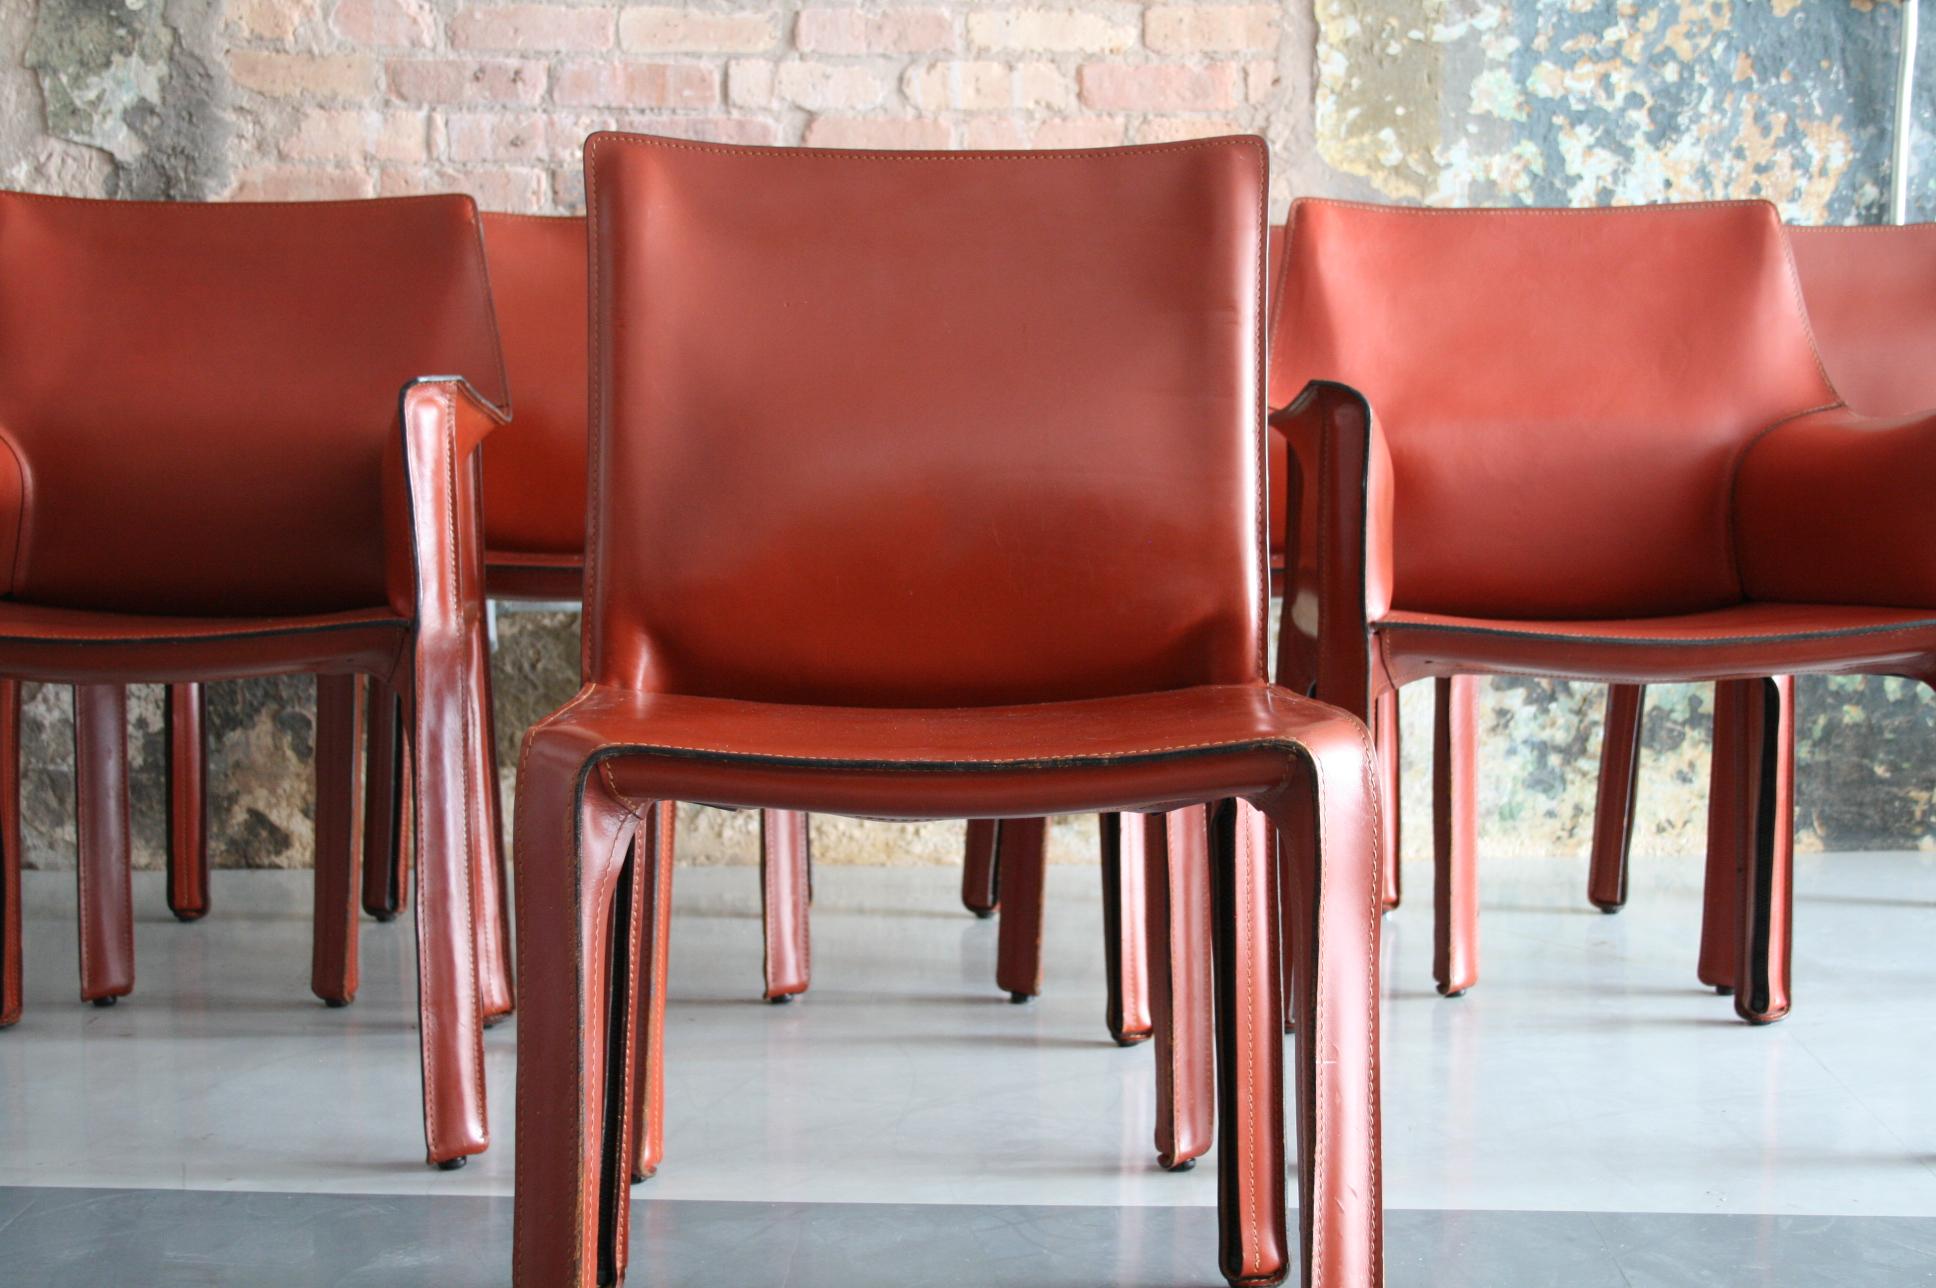 A beautiful set of 8 (2 arm chairs and 6 side chairs) All of them are in fantastic condition with a beautiful rich patina to the red leather. These are an original design by Mario Bellini for Cassina Italy.